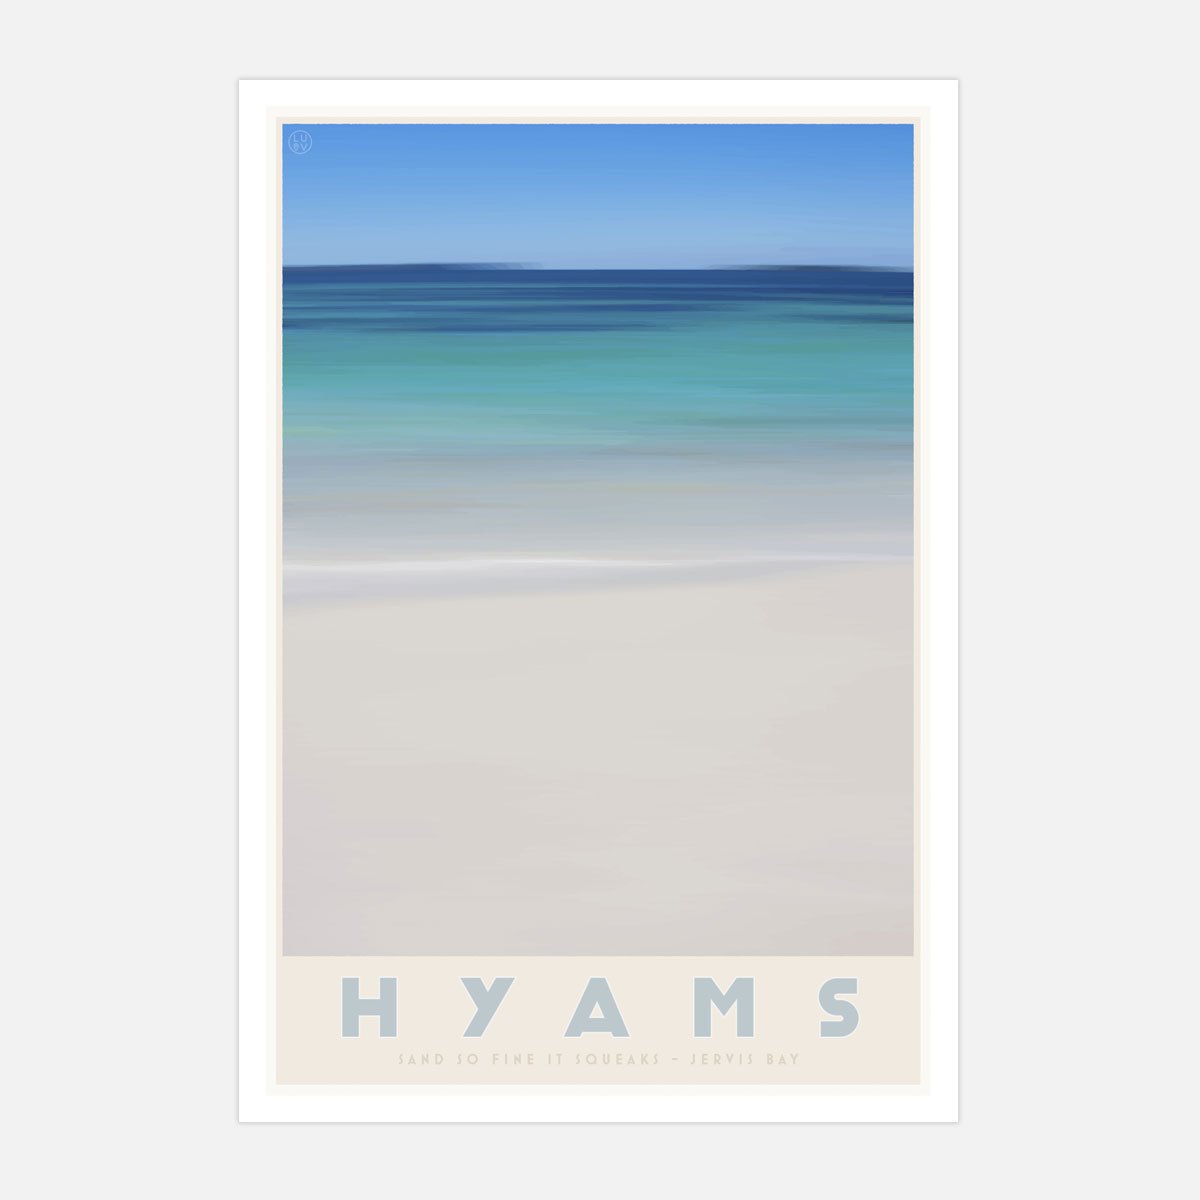 Hyams Beach poster Vintage travel style. original design by places we luv